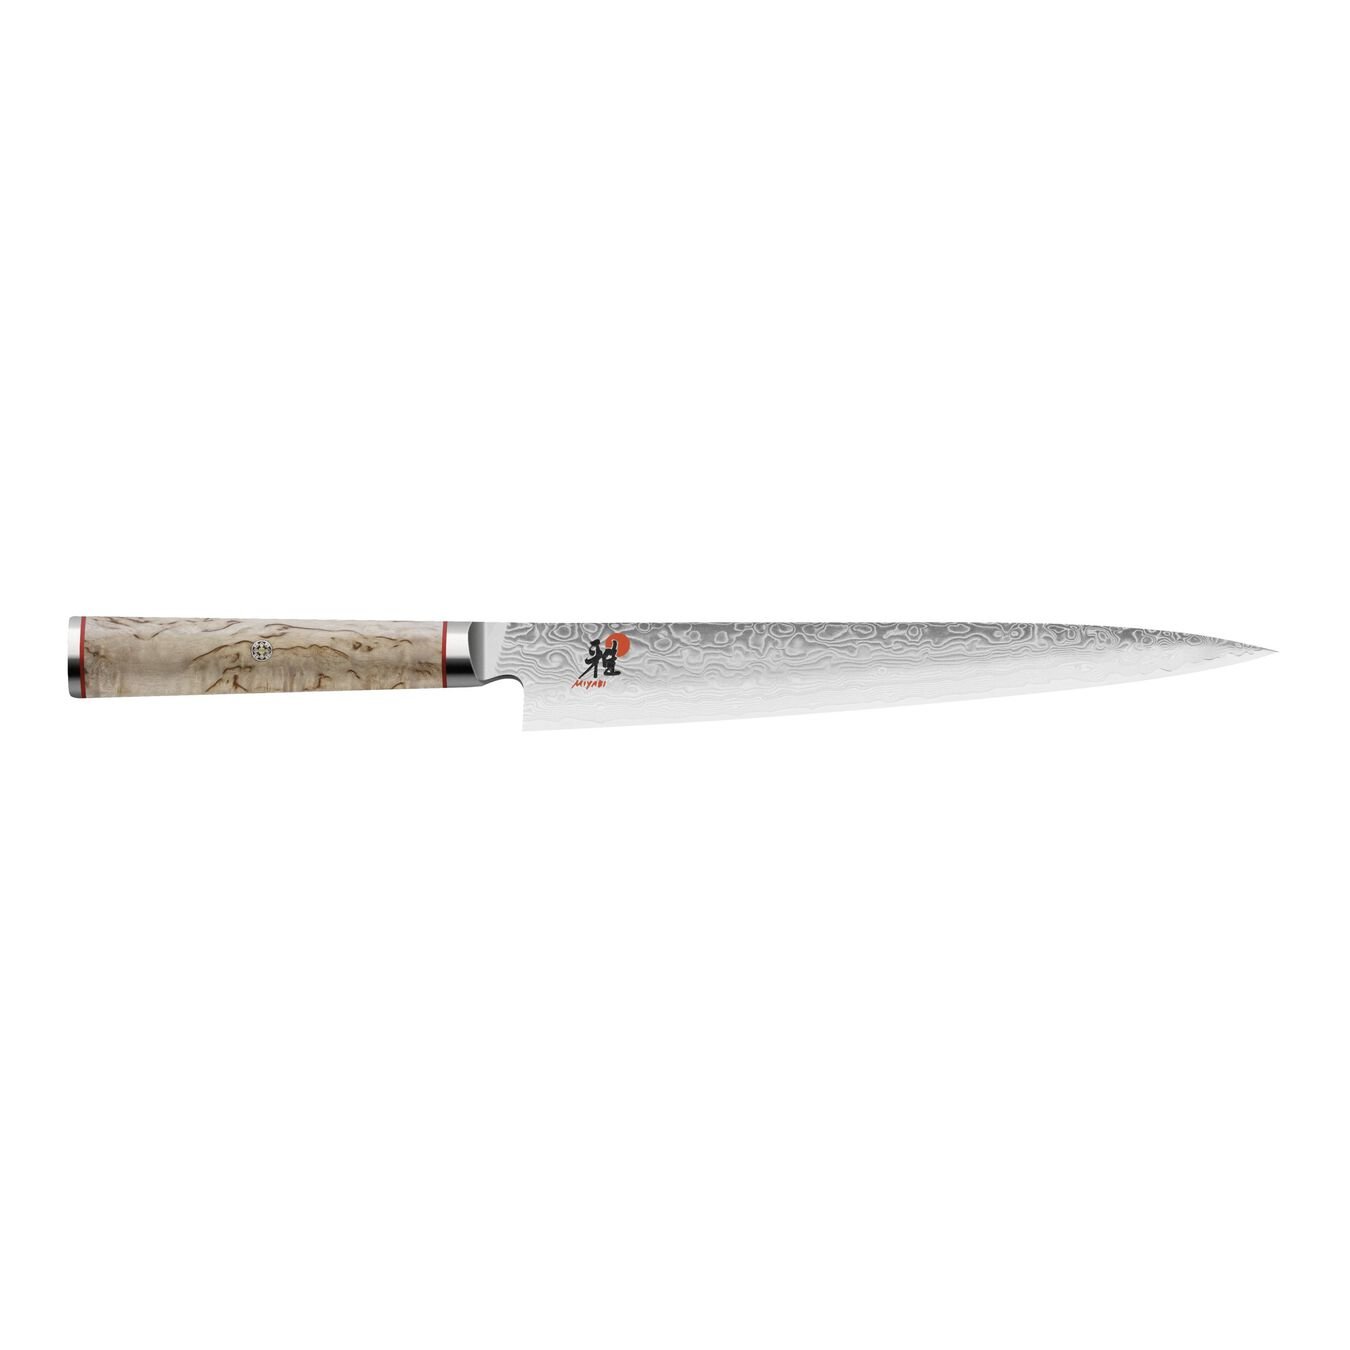 9.5 inch Sujihiki - Visual Imperfections,,large 1